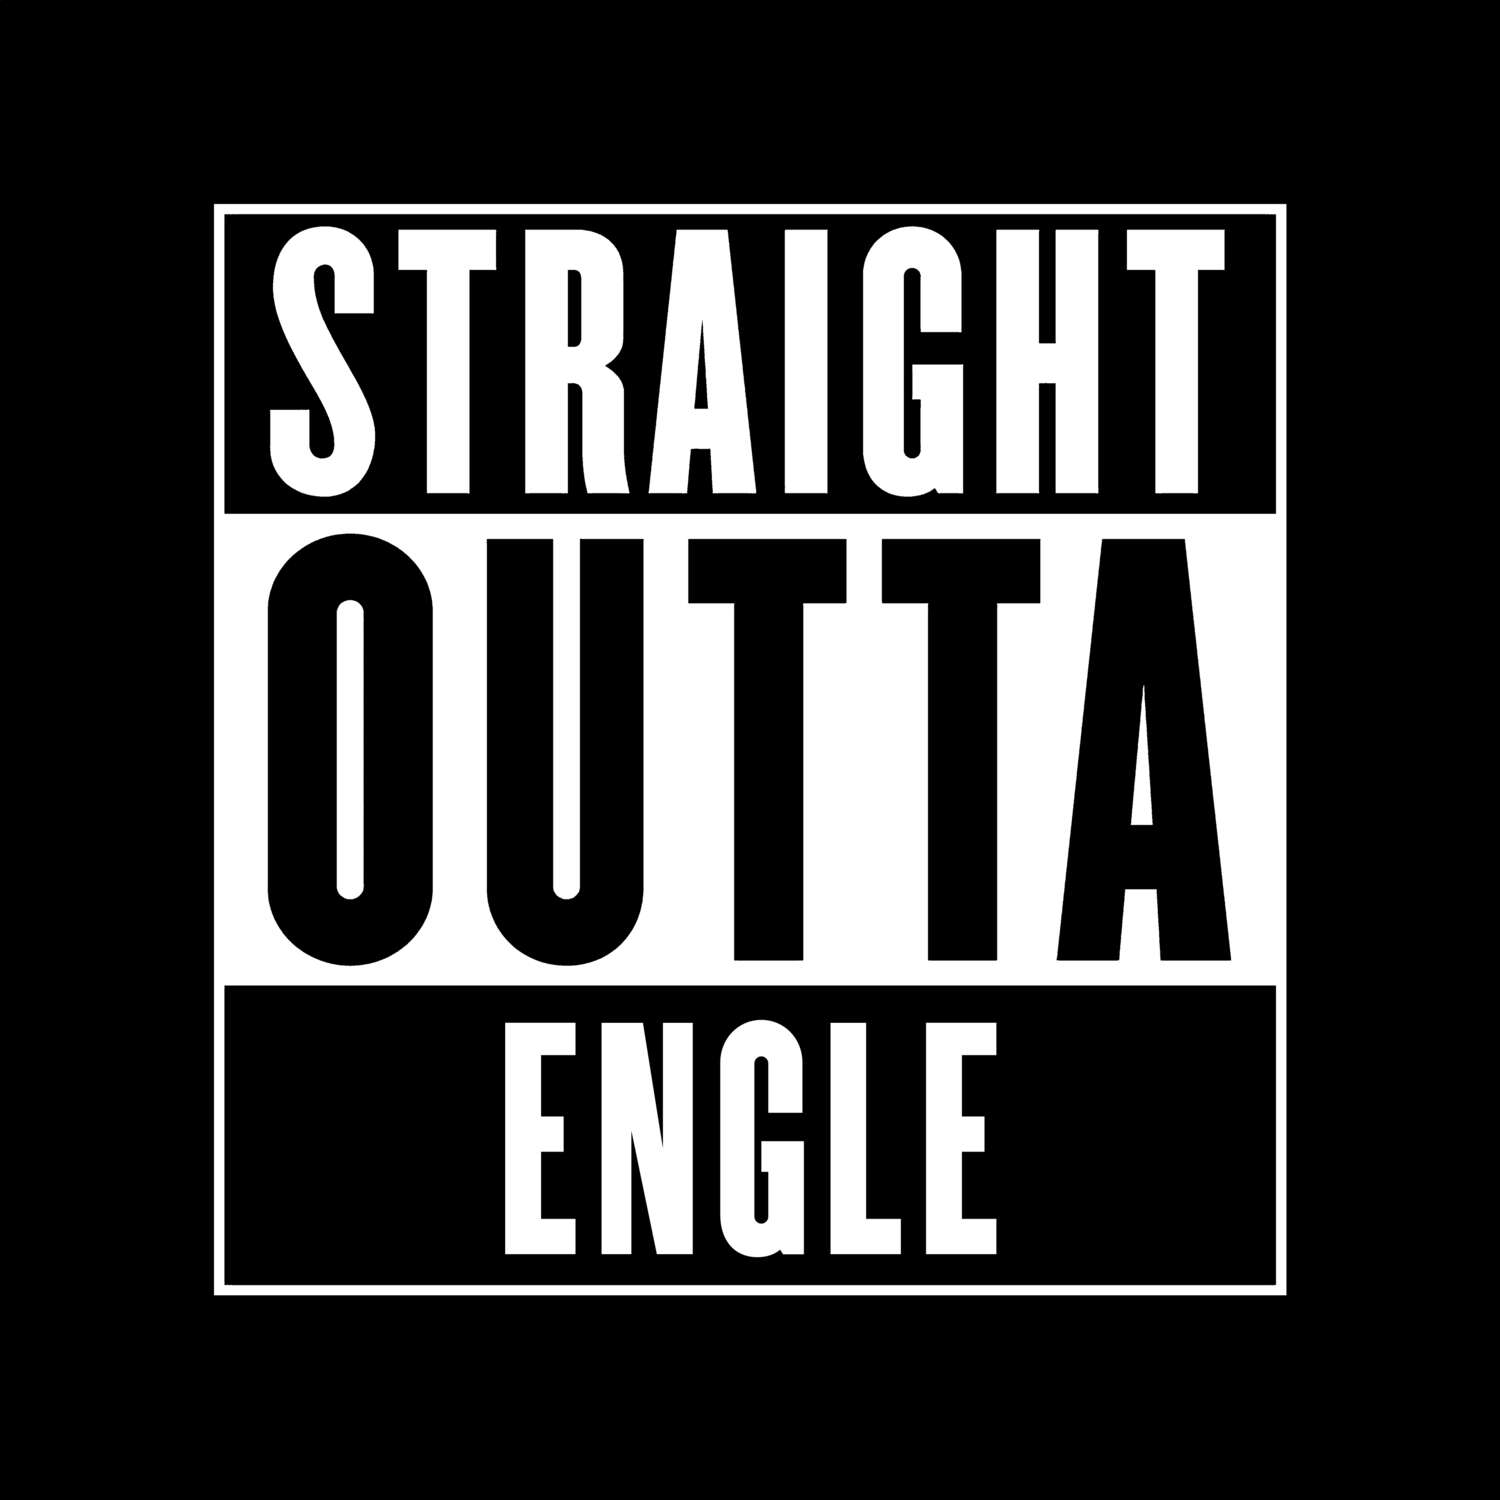 Engle T-Shirt »Straight Outta«